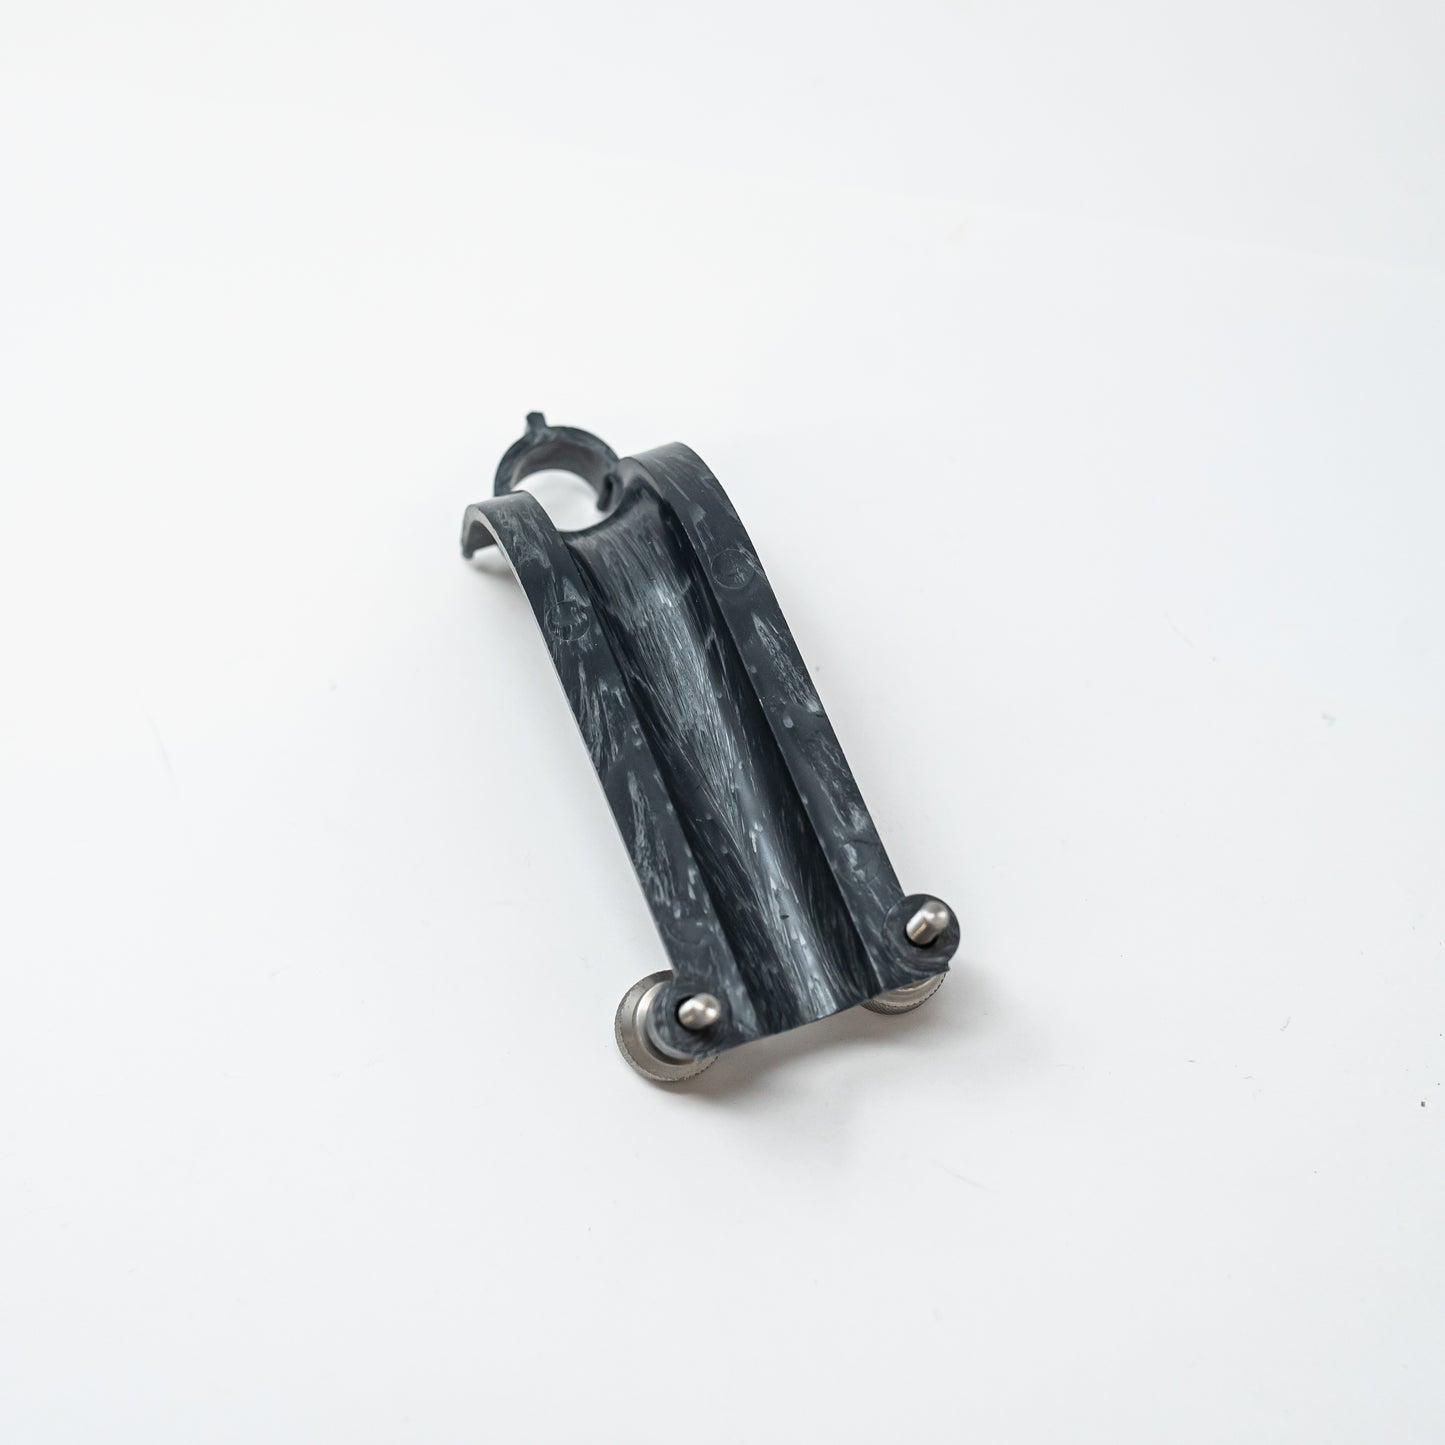 Plastic guide with thumbscrews